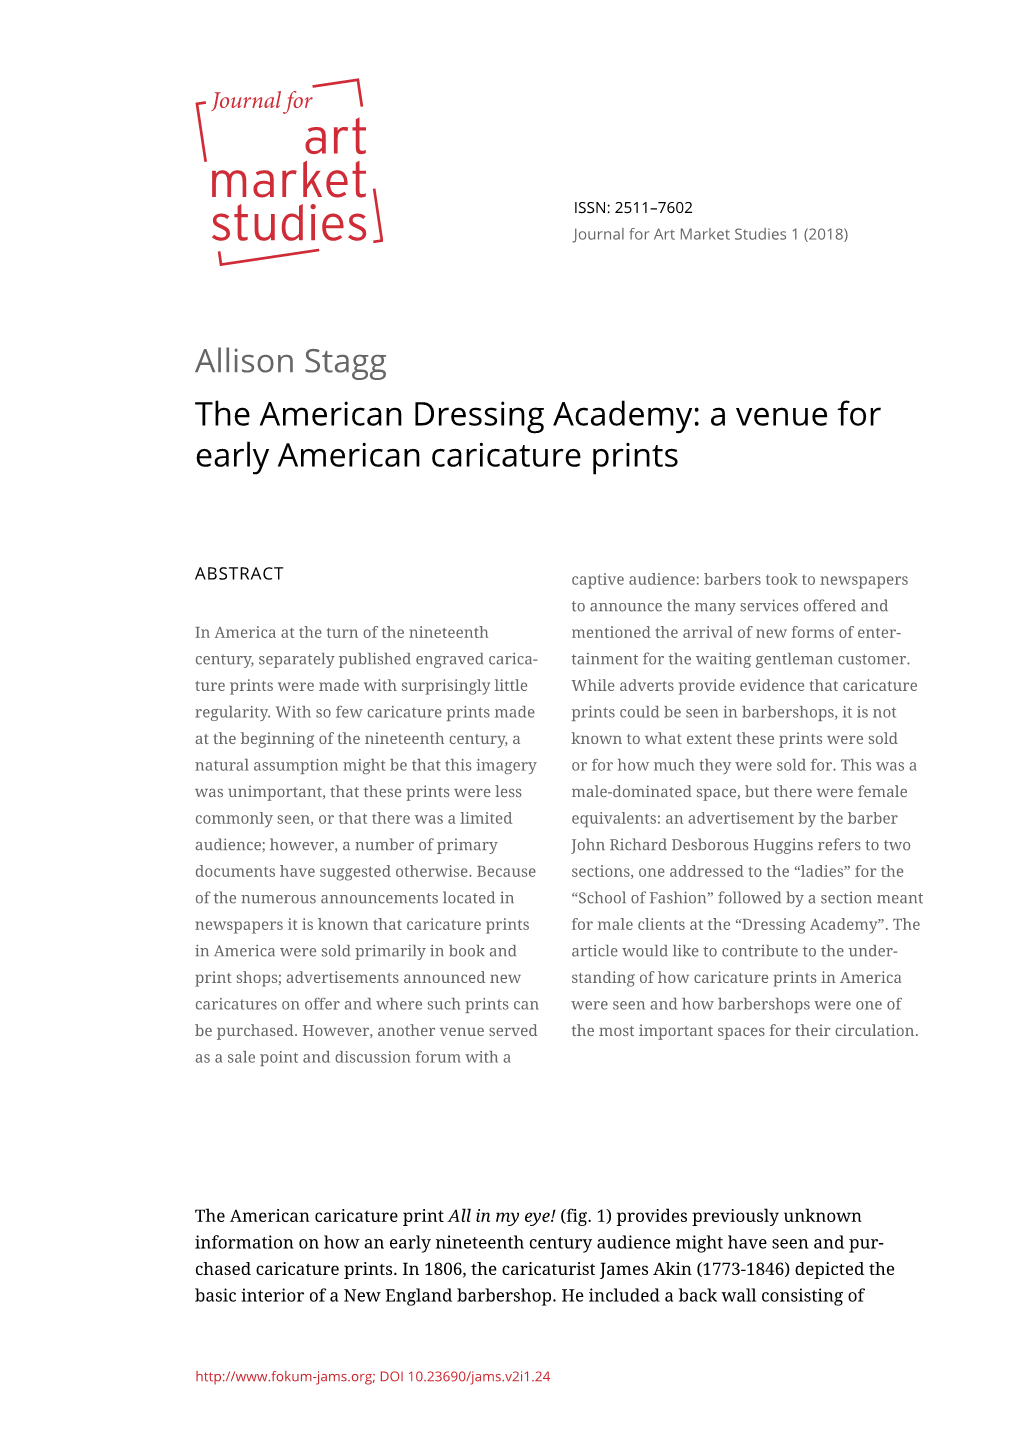 Allison Stagg the American Dressing Academy: a Venue for Early American Caricature Prints